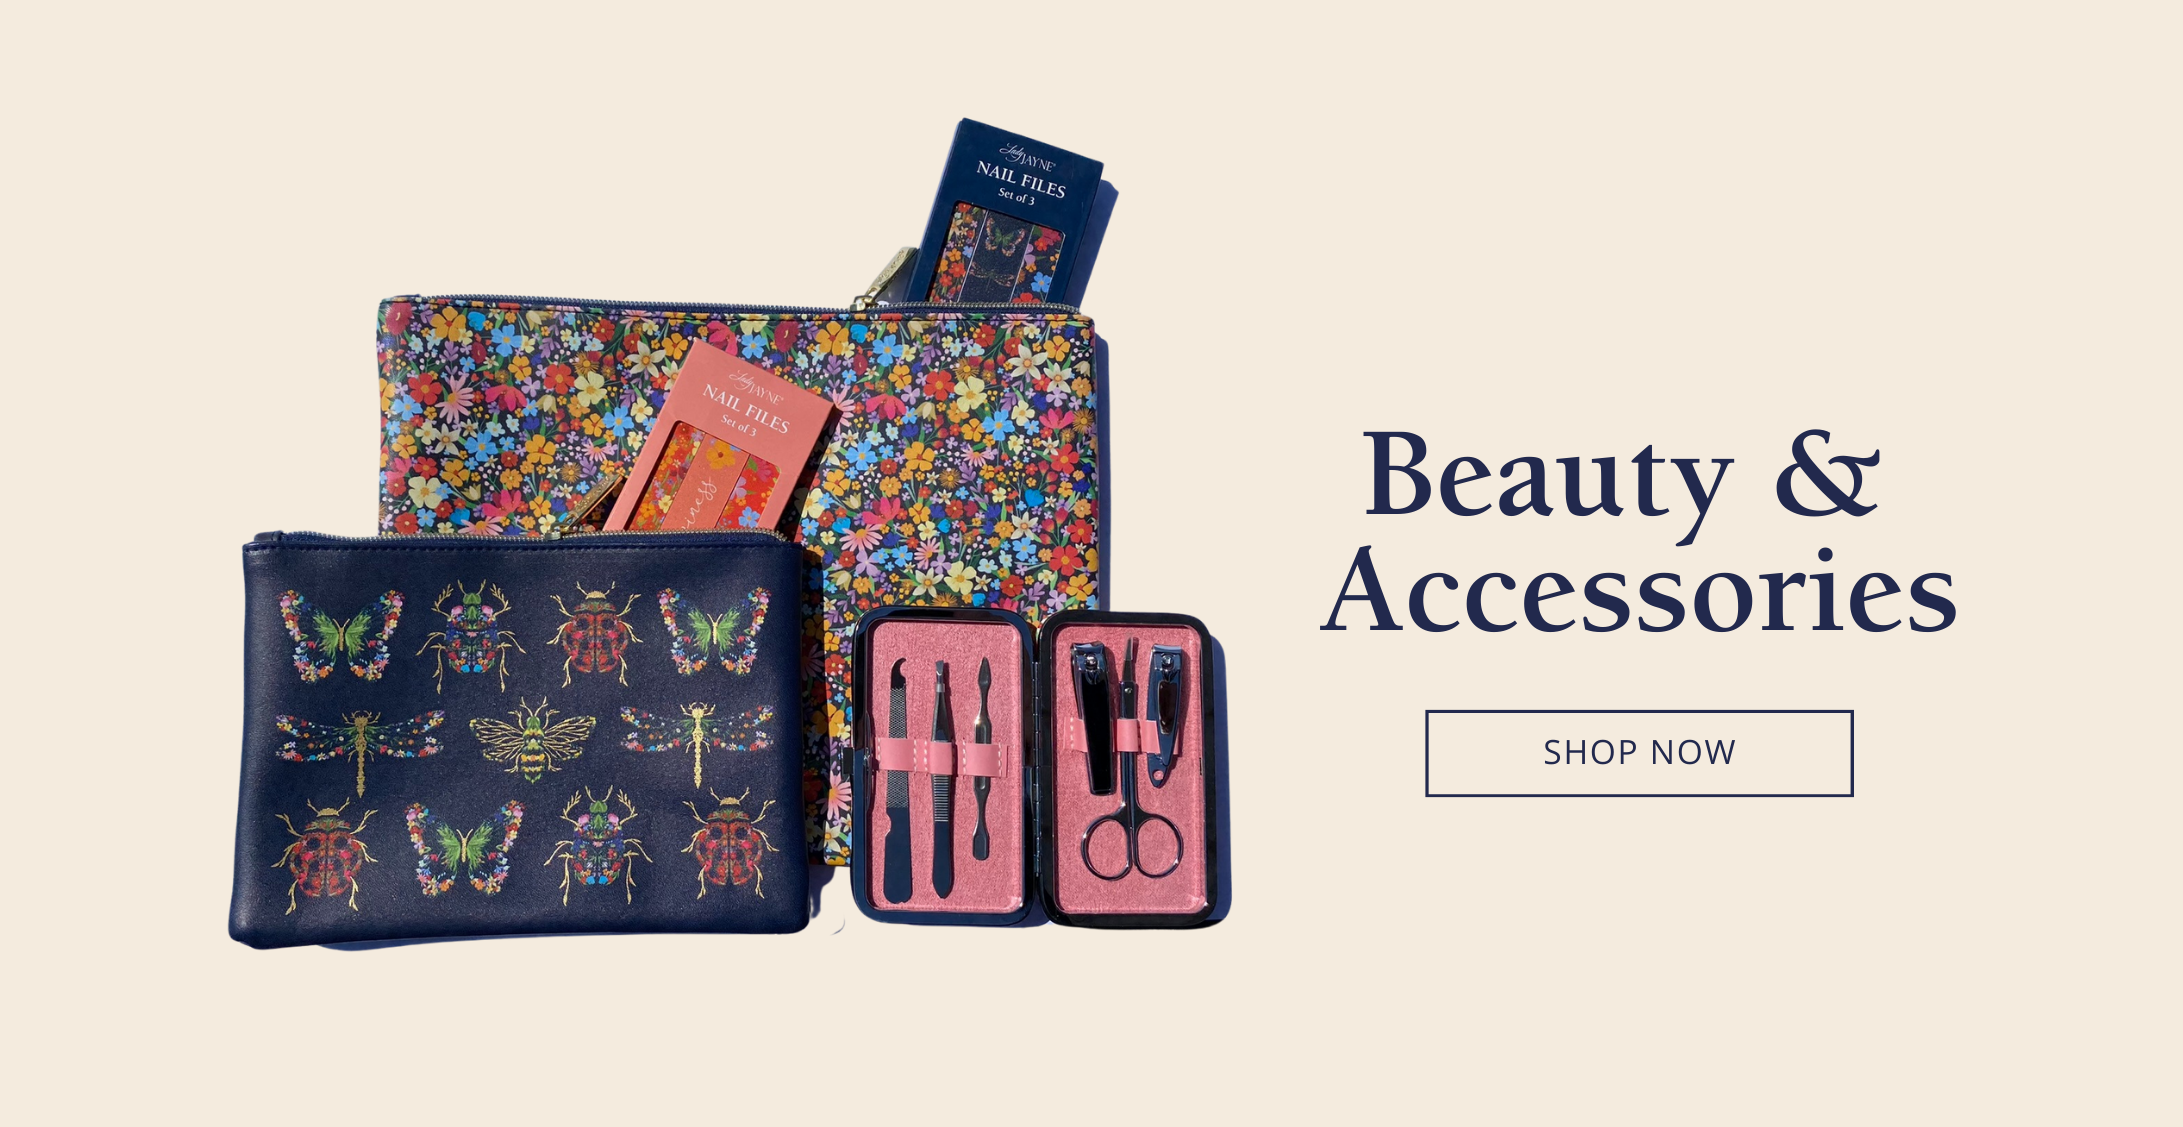 Botanical Garden Collection by Lady Jayne Beauty & Accessories